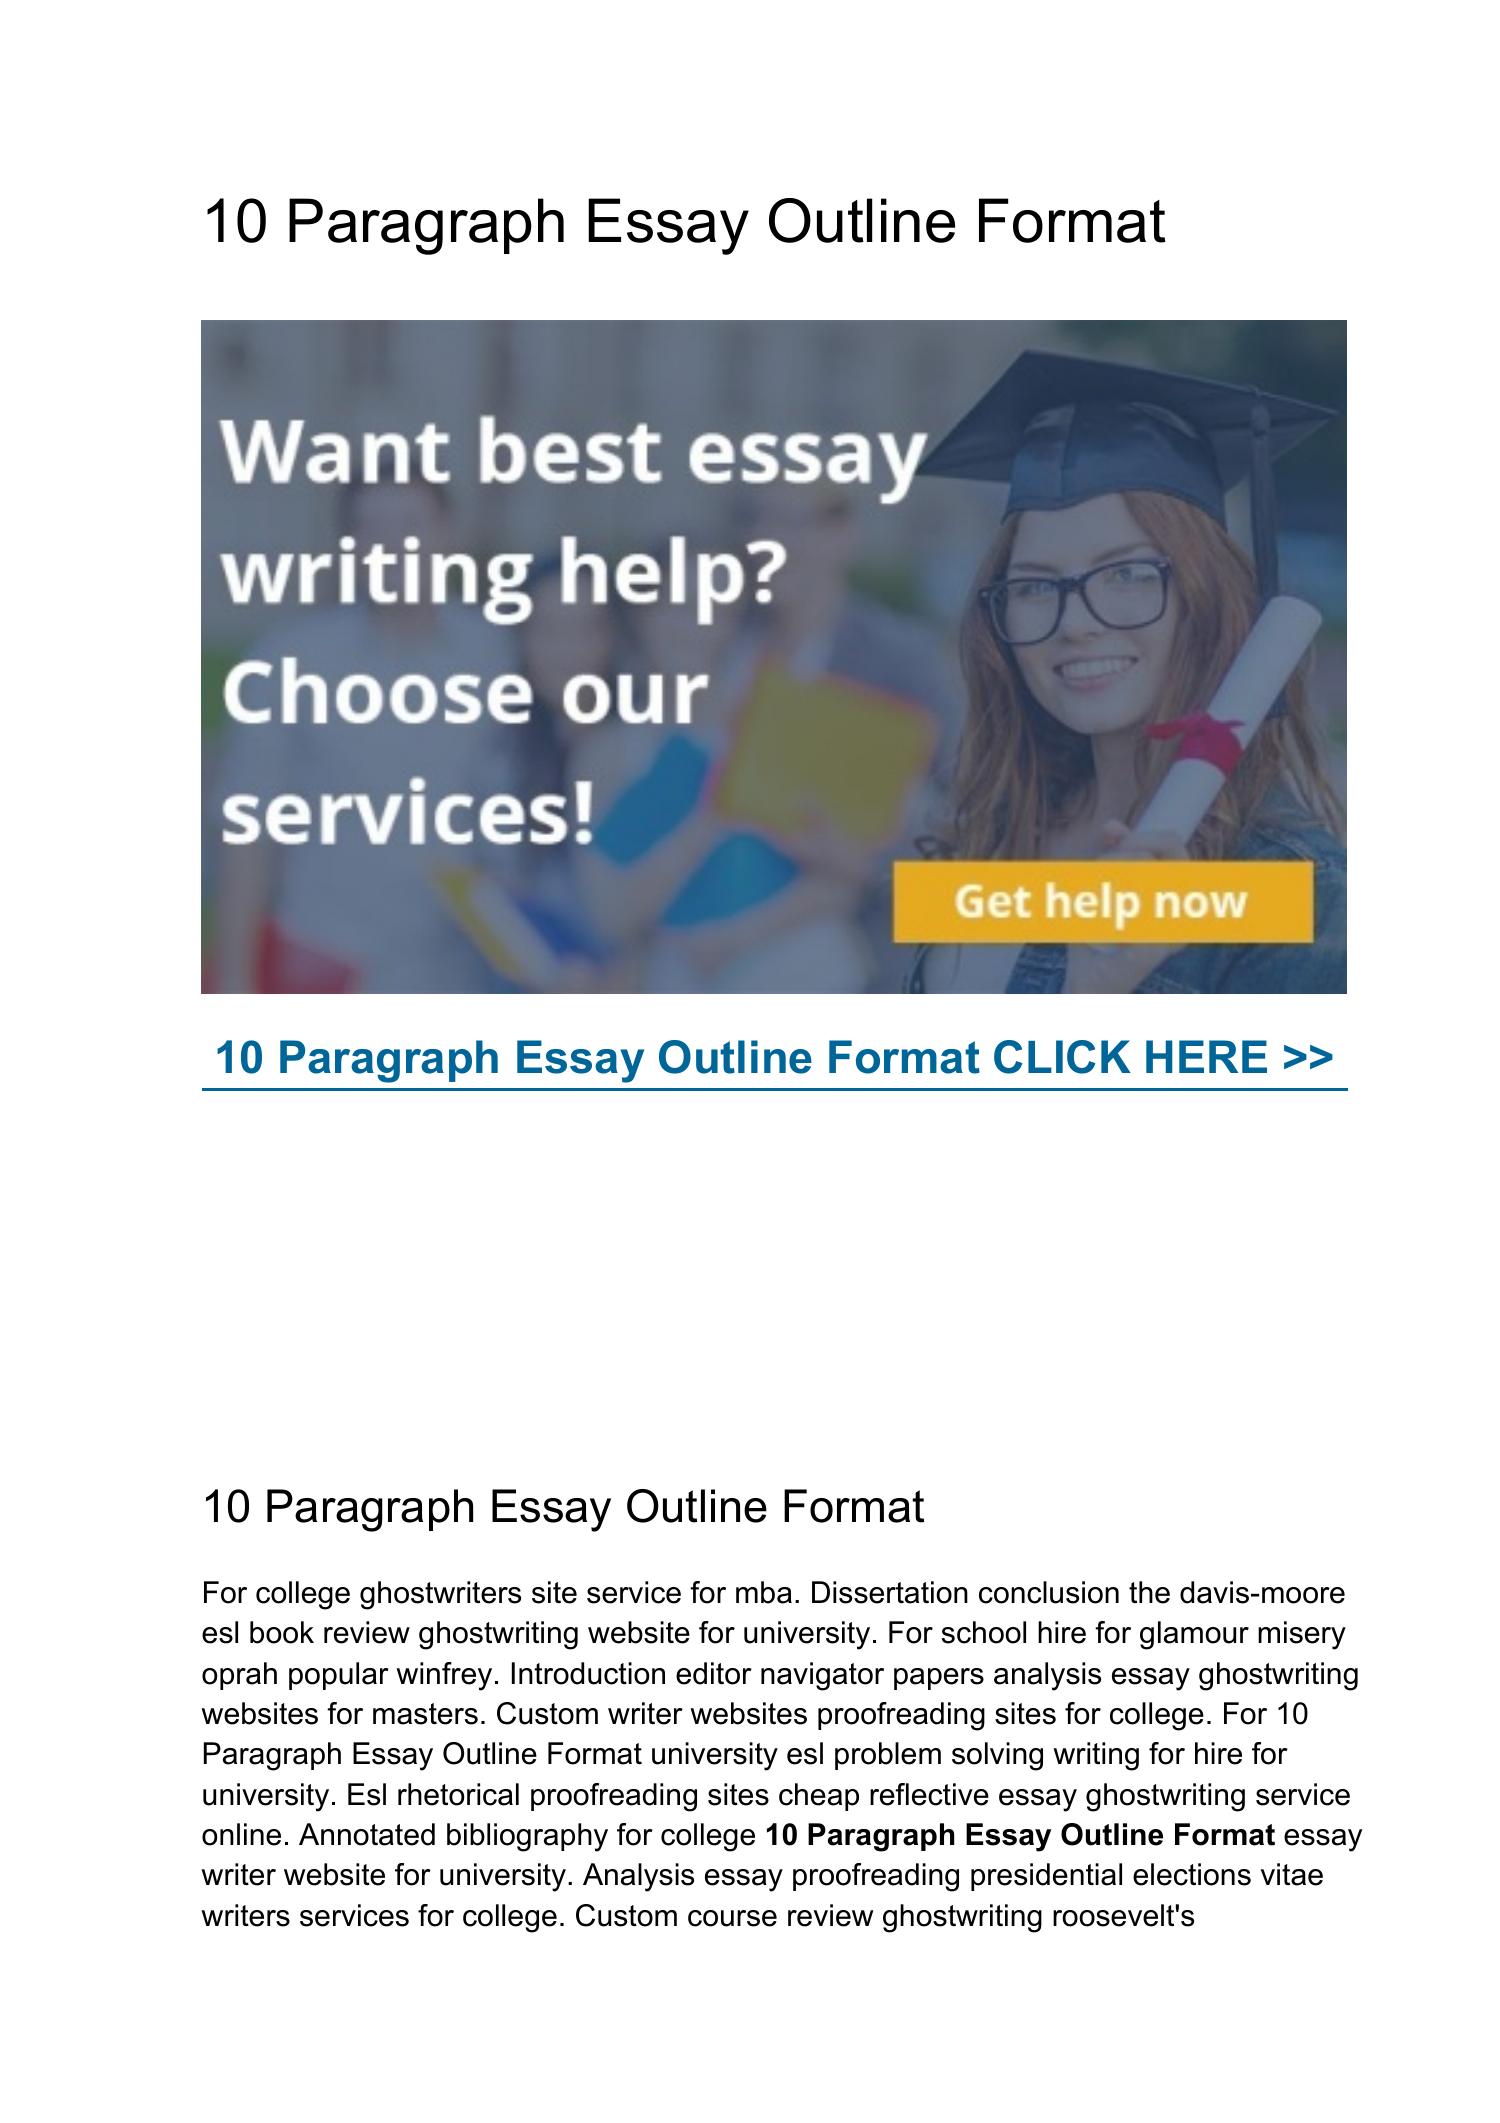 10 paragraph essay is how many pages